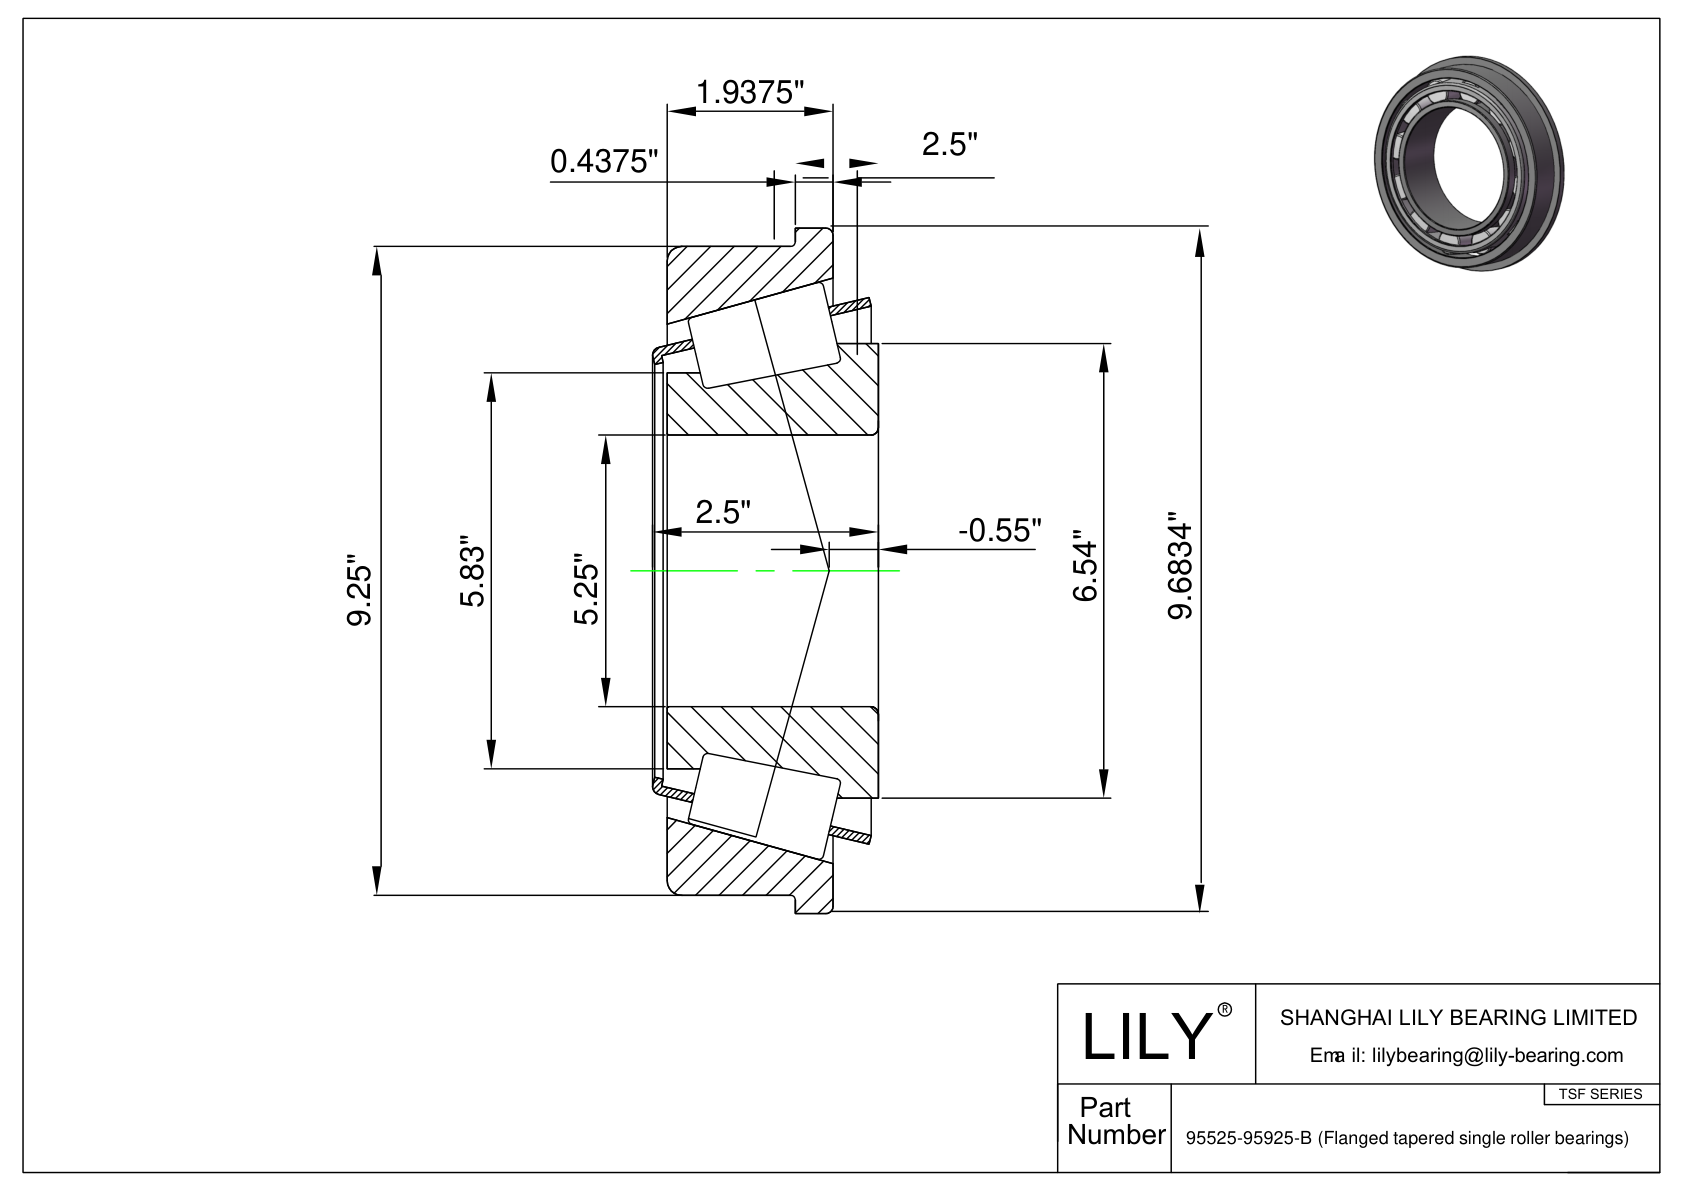 95525-95925-B TSF (Tapered Single Roller Bearings with Flange) (Imperial) cad drawing